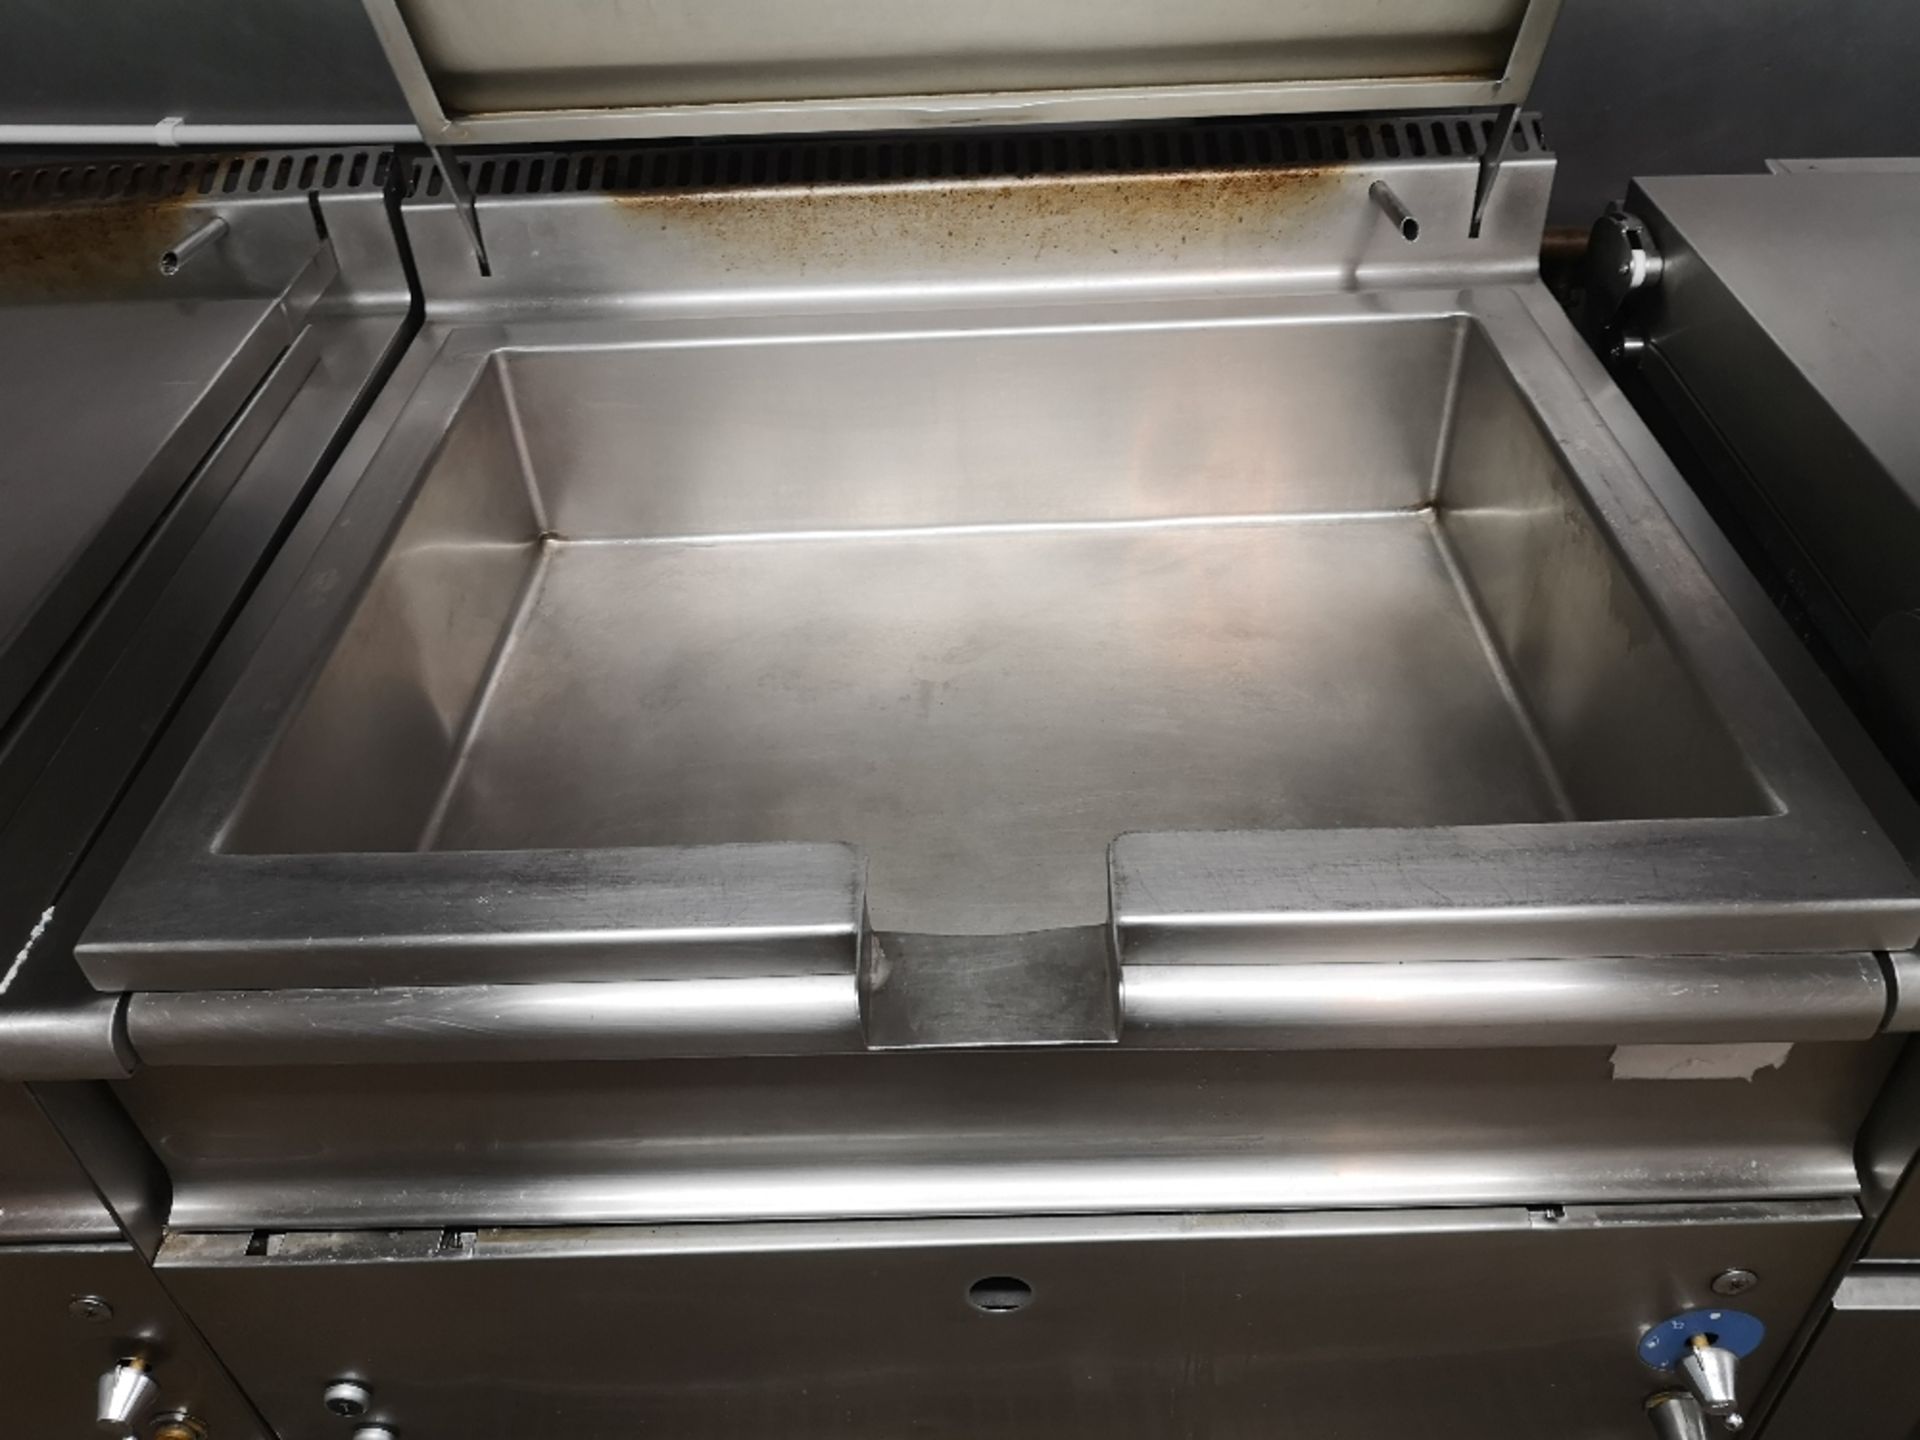 Stainless Steel 80Ltr Natural Gas Bratt Pan - Image 4 of 4